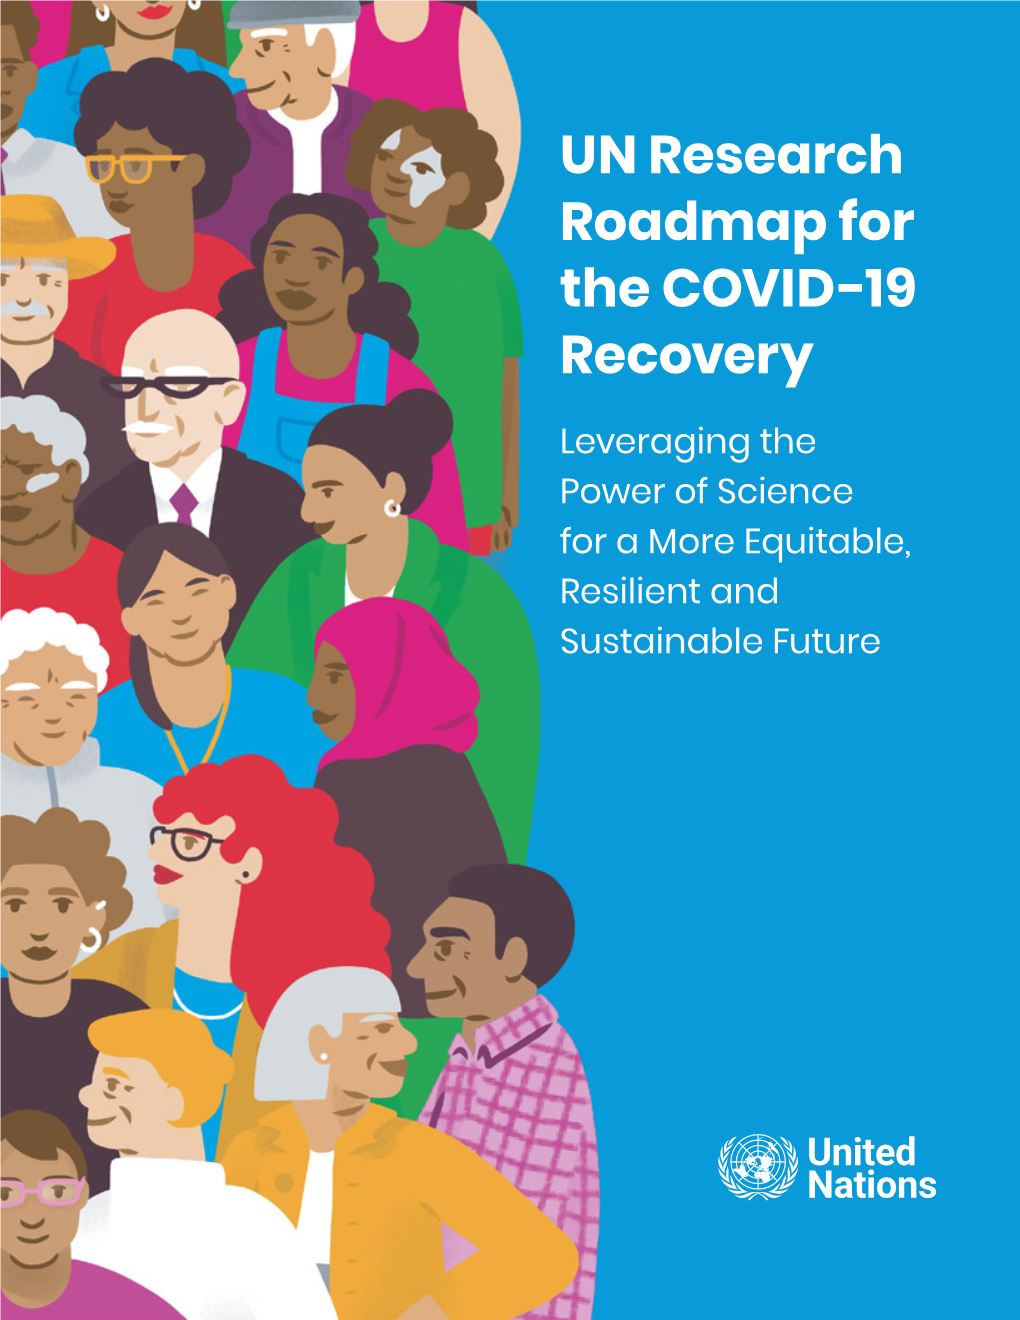 UN Research Roadmap for the COVID-19 Recovery Leveraging the Power of Science for a More Equitable, Resilient and Sustainable Future